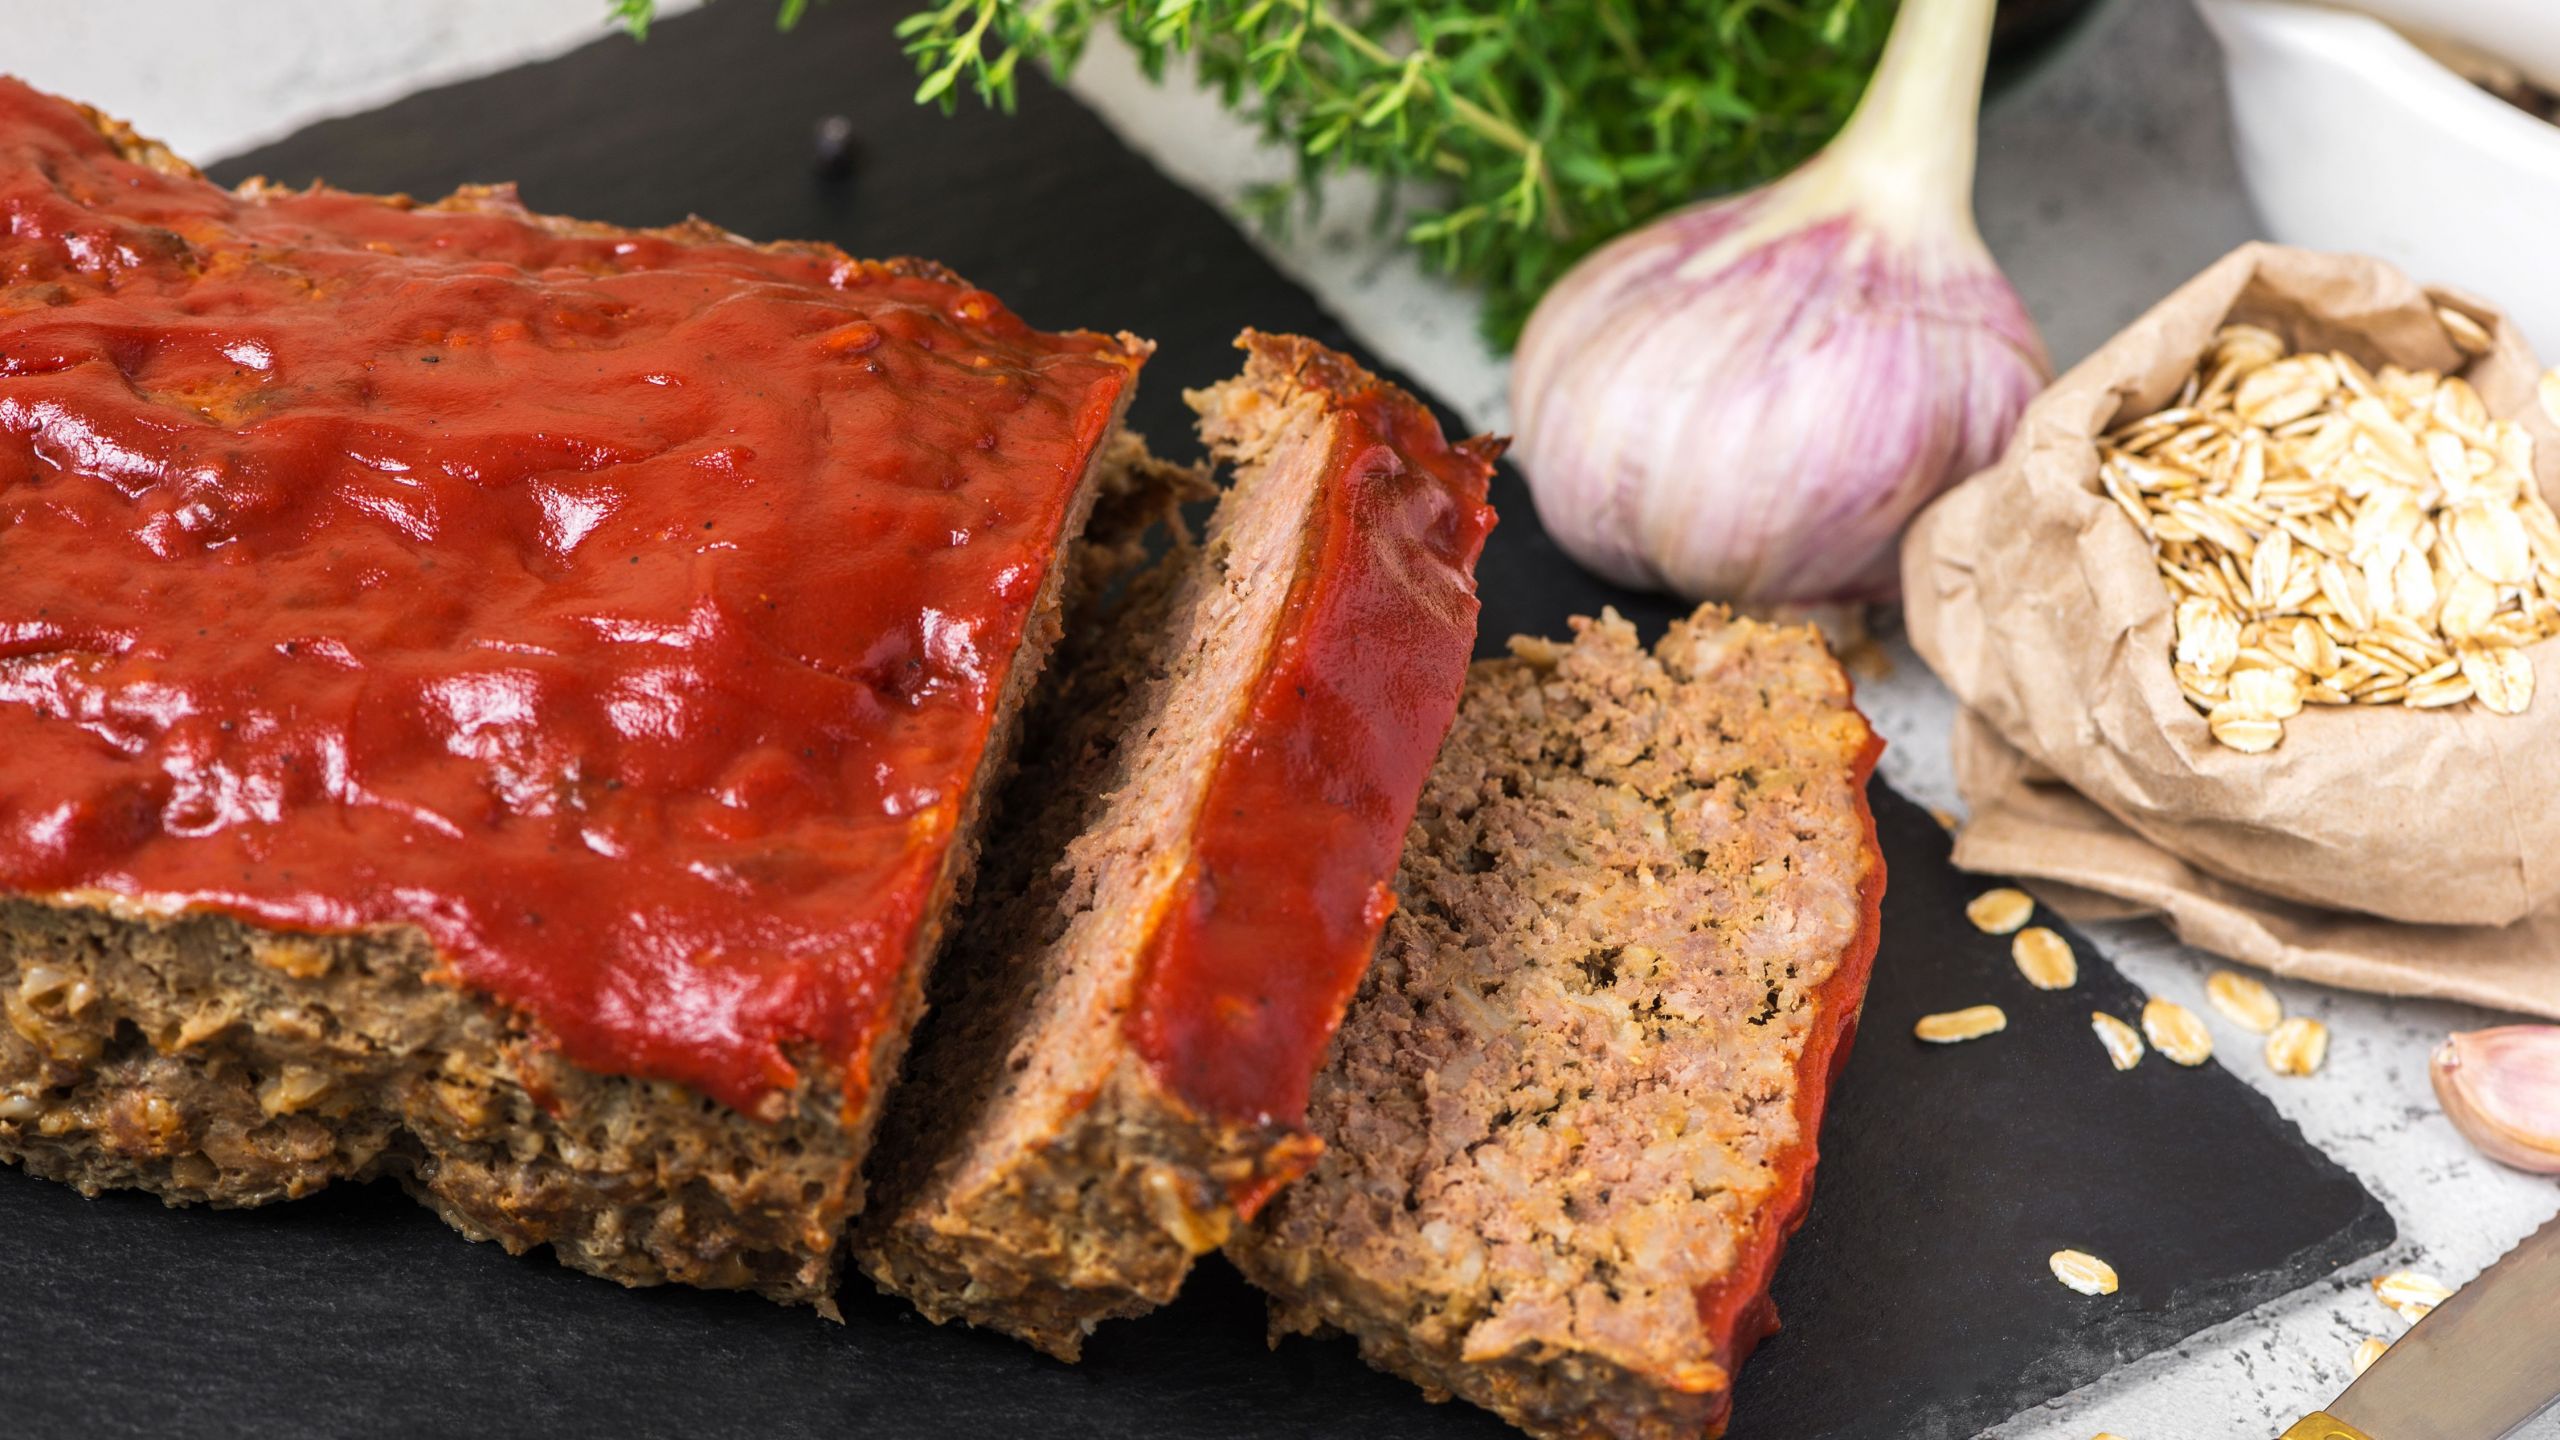 Meatloaf Recipe with Oatmeal and Onion soup Lovely Meatloaf Recipe with Lipton Ion soup Mix and Oatmeal